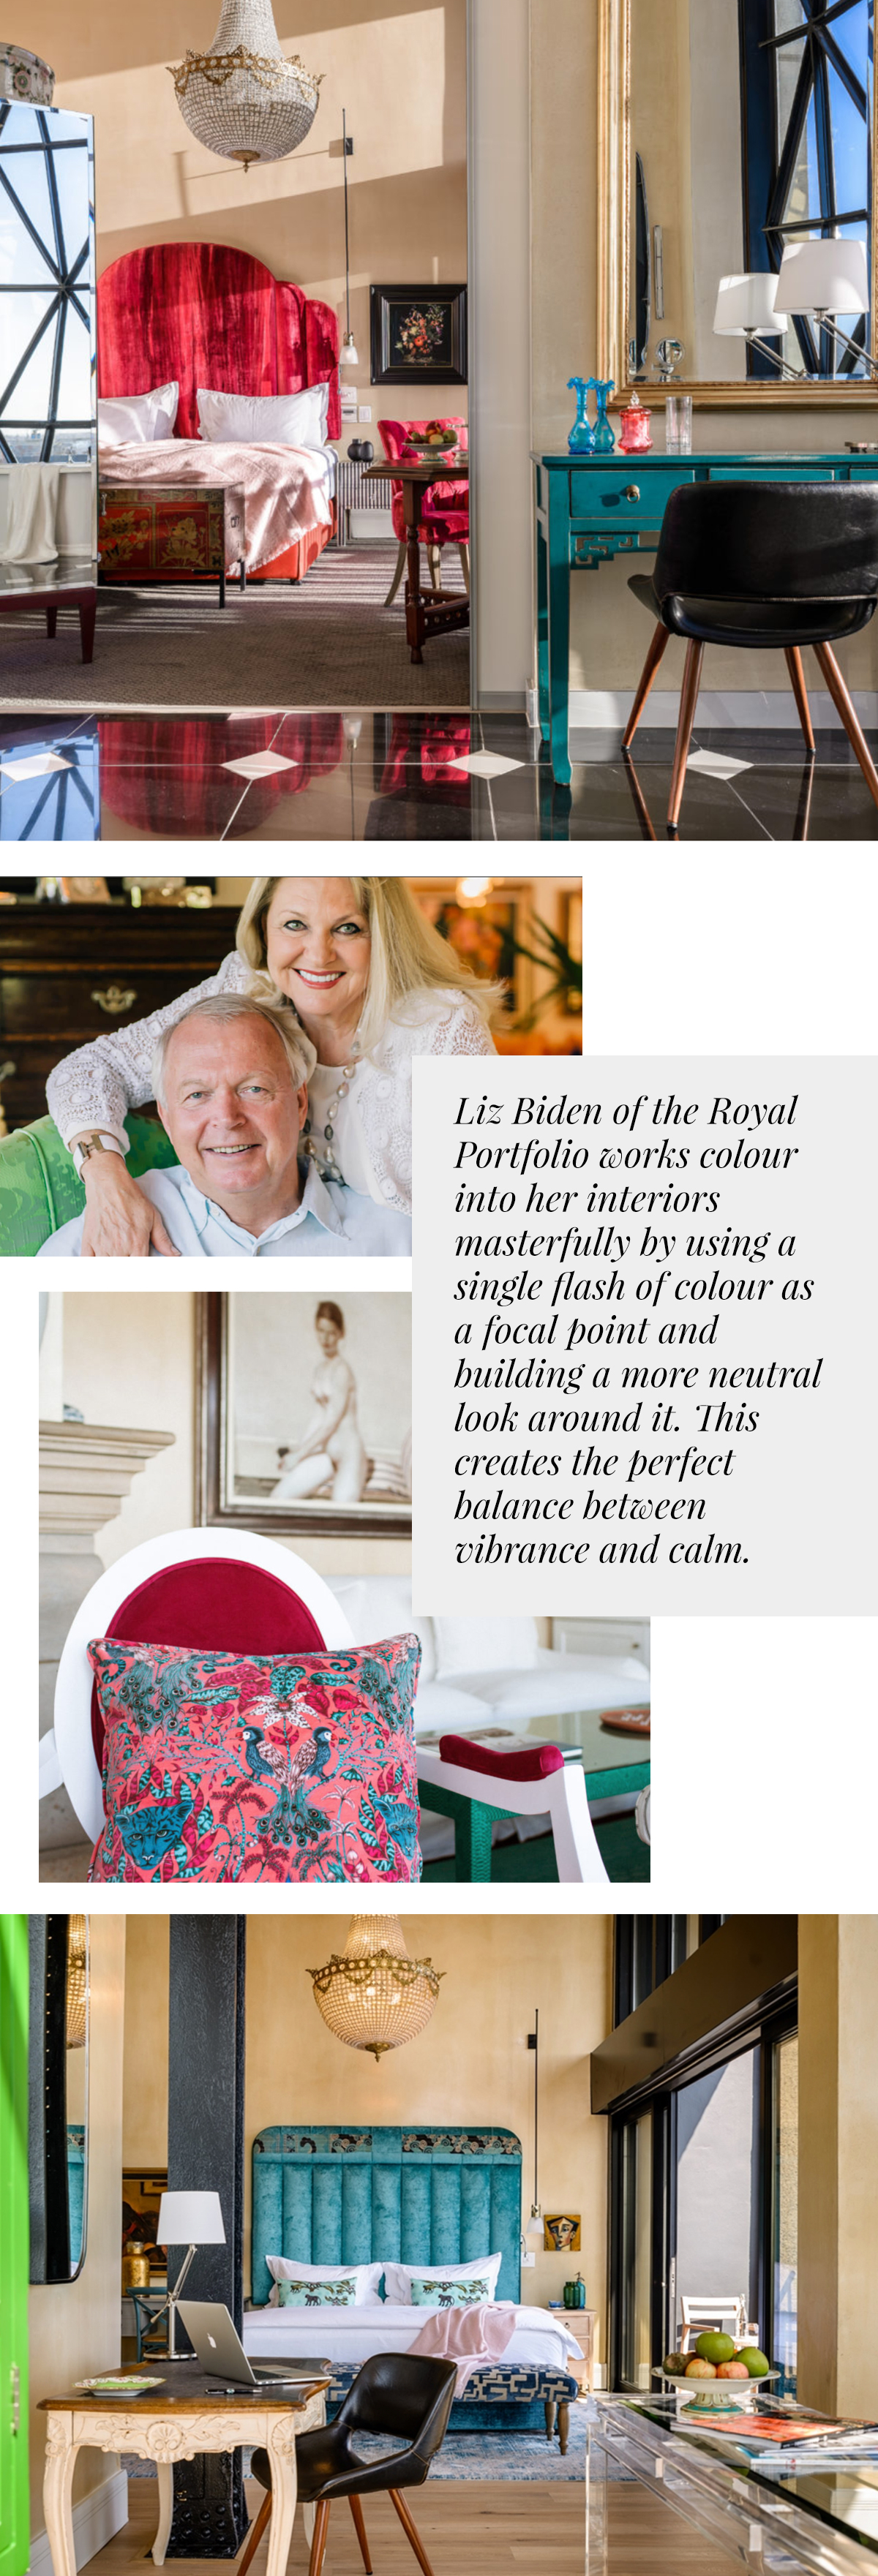 Liz Biden of the Royal Portfolio works colour into her interiors masterfully by using a single flash of colour as a focal point and building a more neutral look around it. This creates the perfect balance between vibrance and calm.